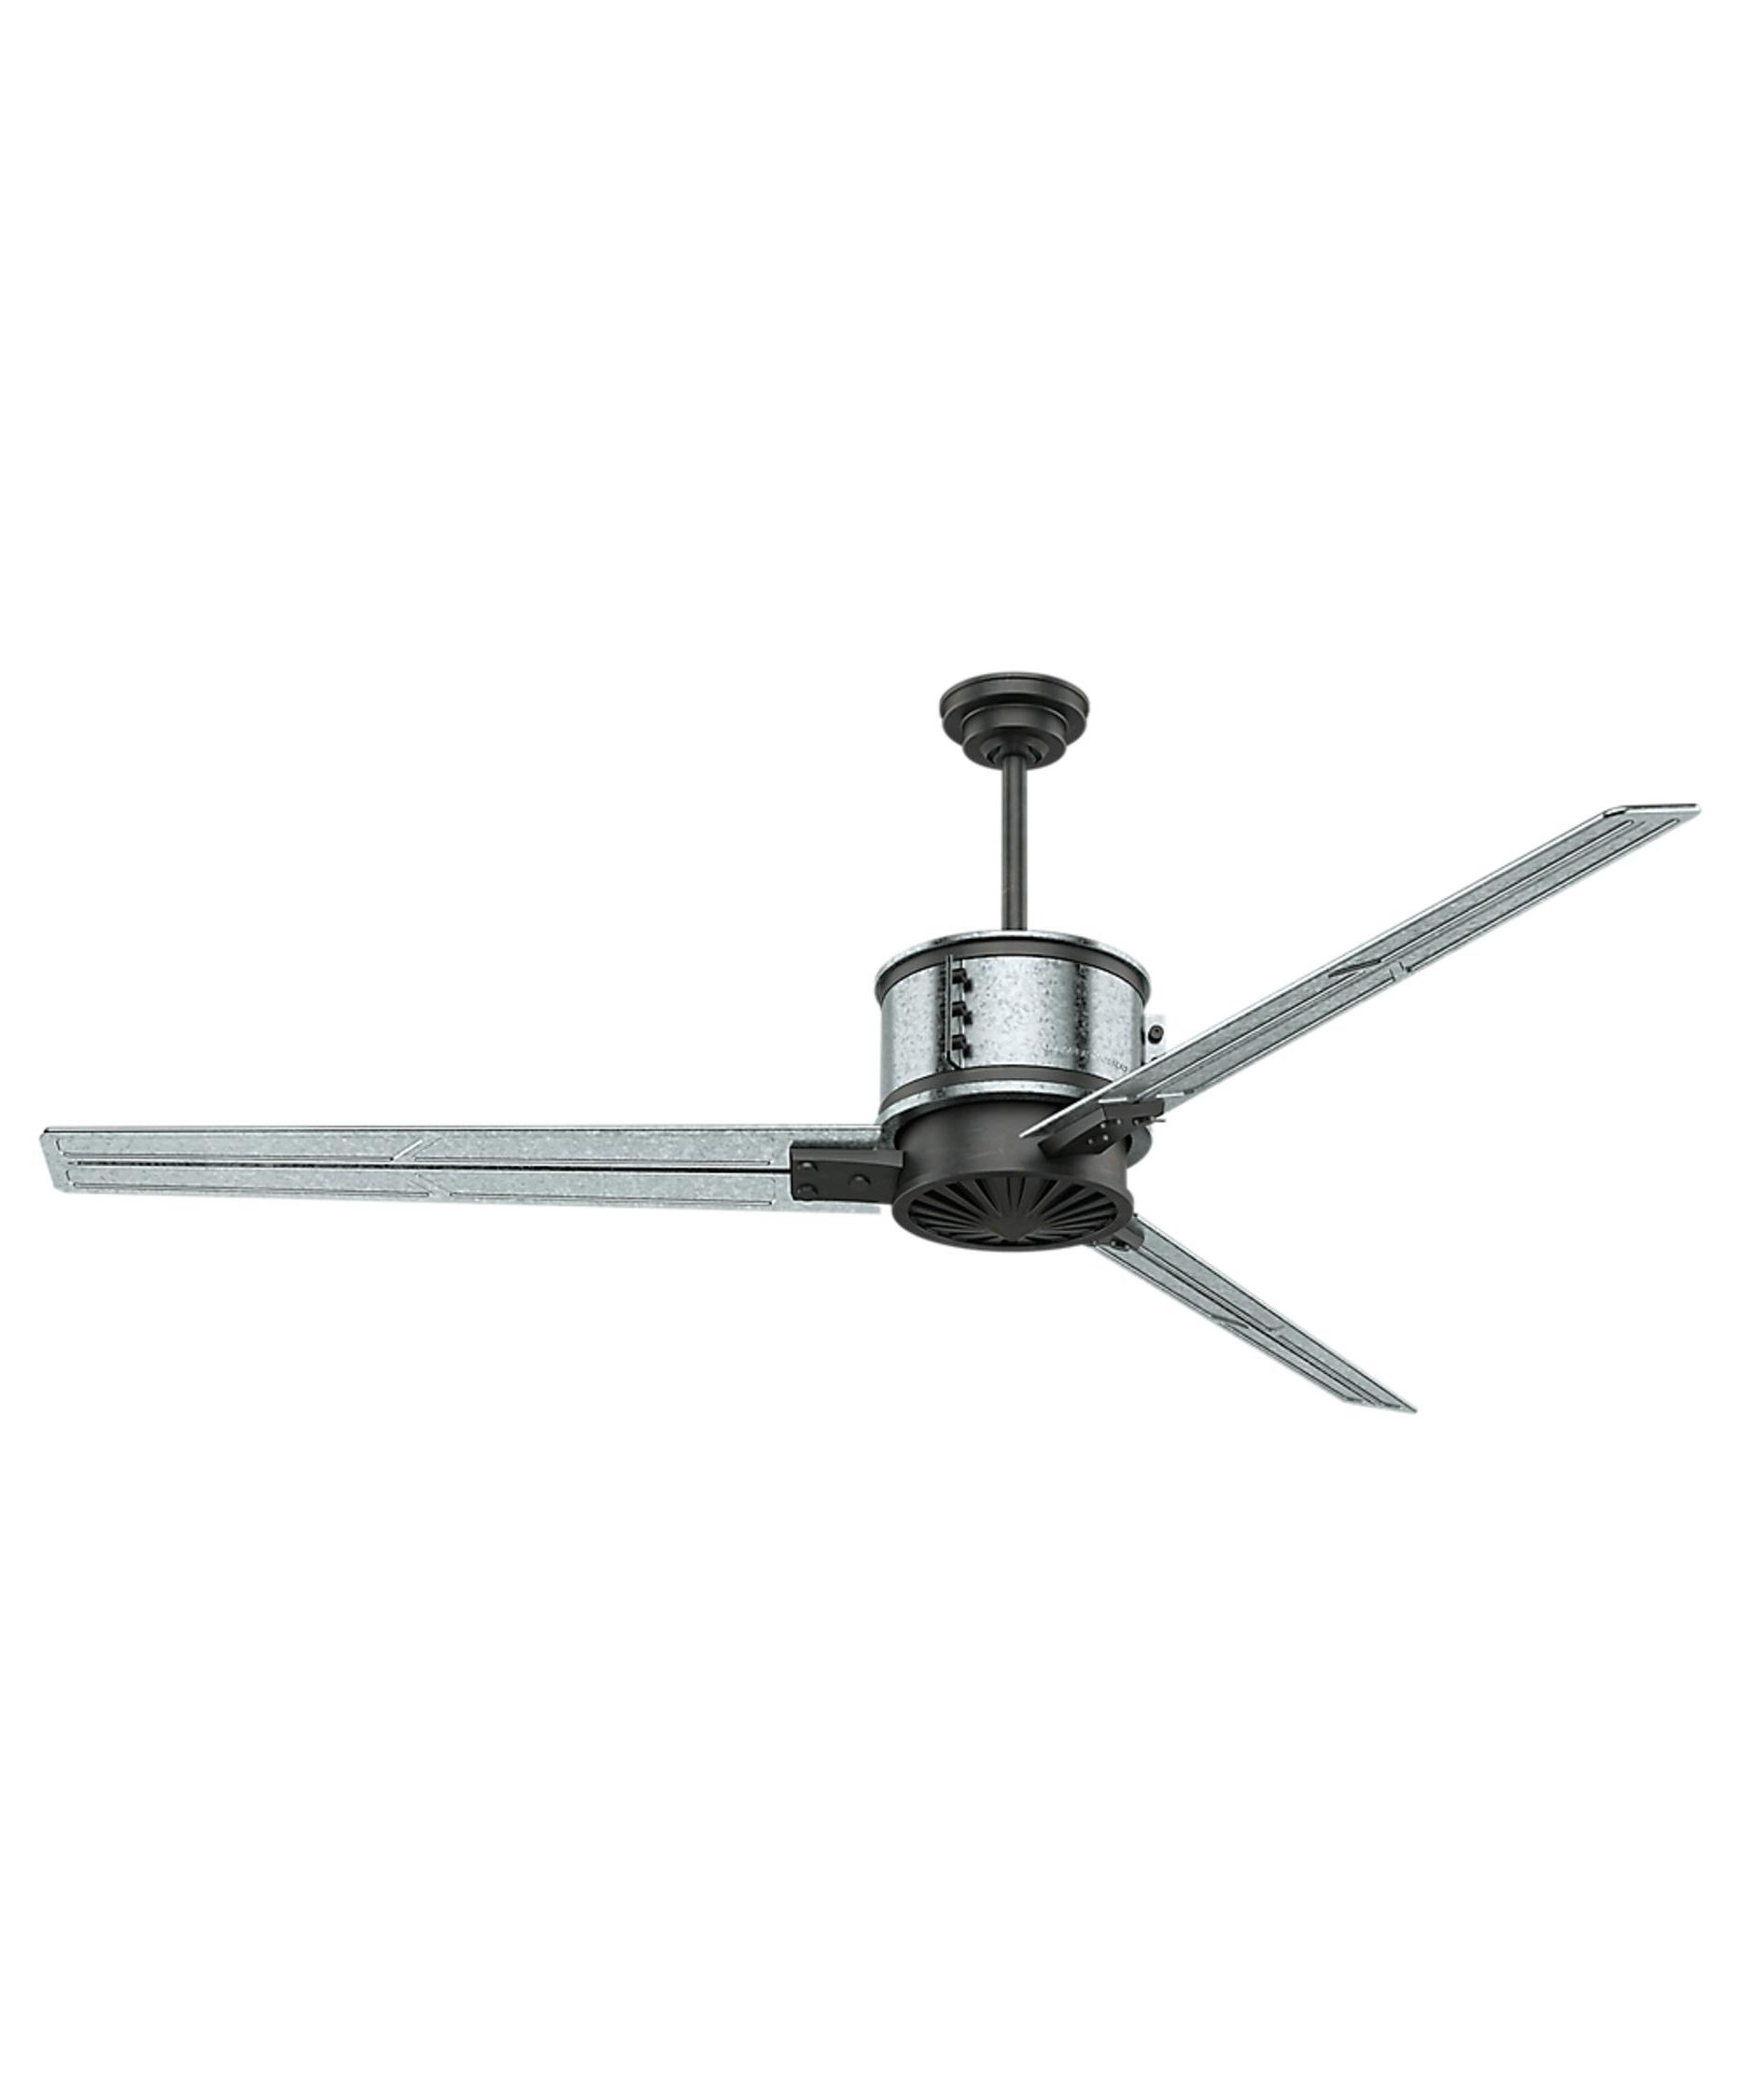 Most Popular Outdoor Ceiling Fans With Galvanized Blades With Regard To Casablanca 59193 Duluth 72 Inch 3 Blade Ceiling Fan (View 7 of 20)